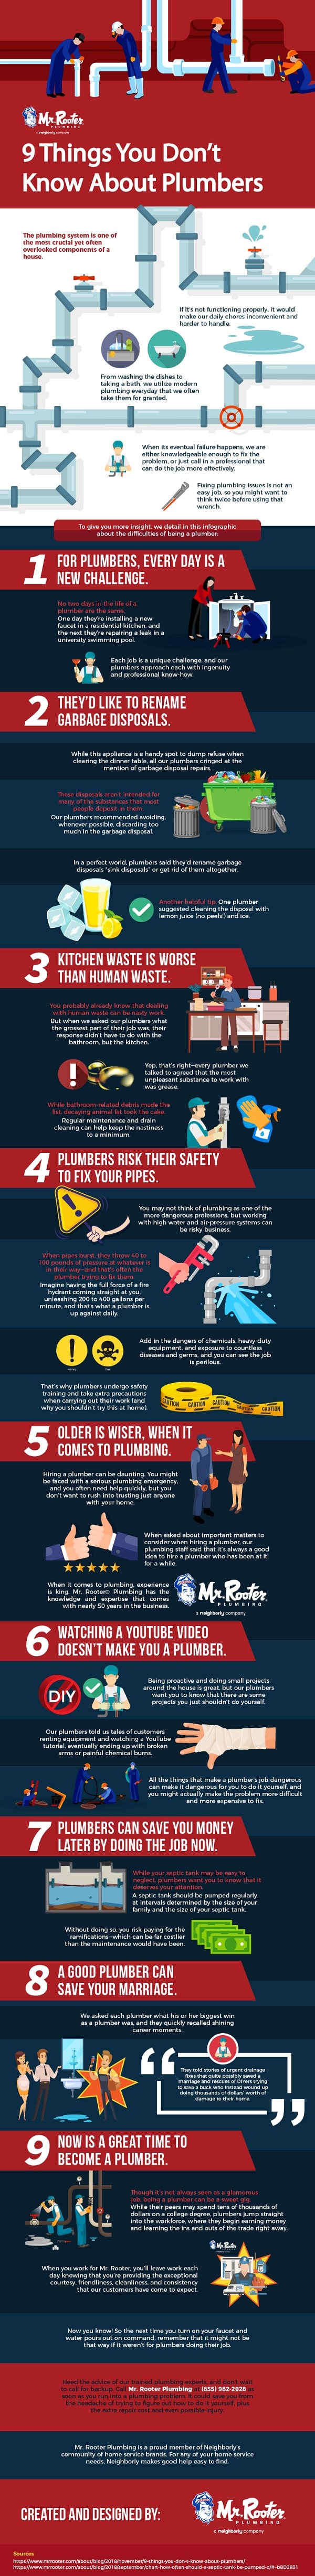 9 Things You Don’t Know About Plumbers